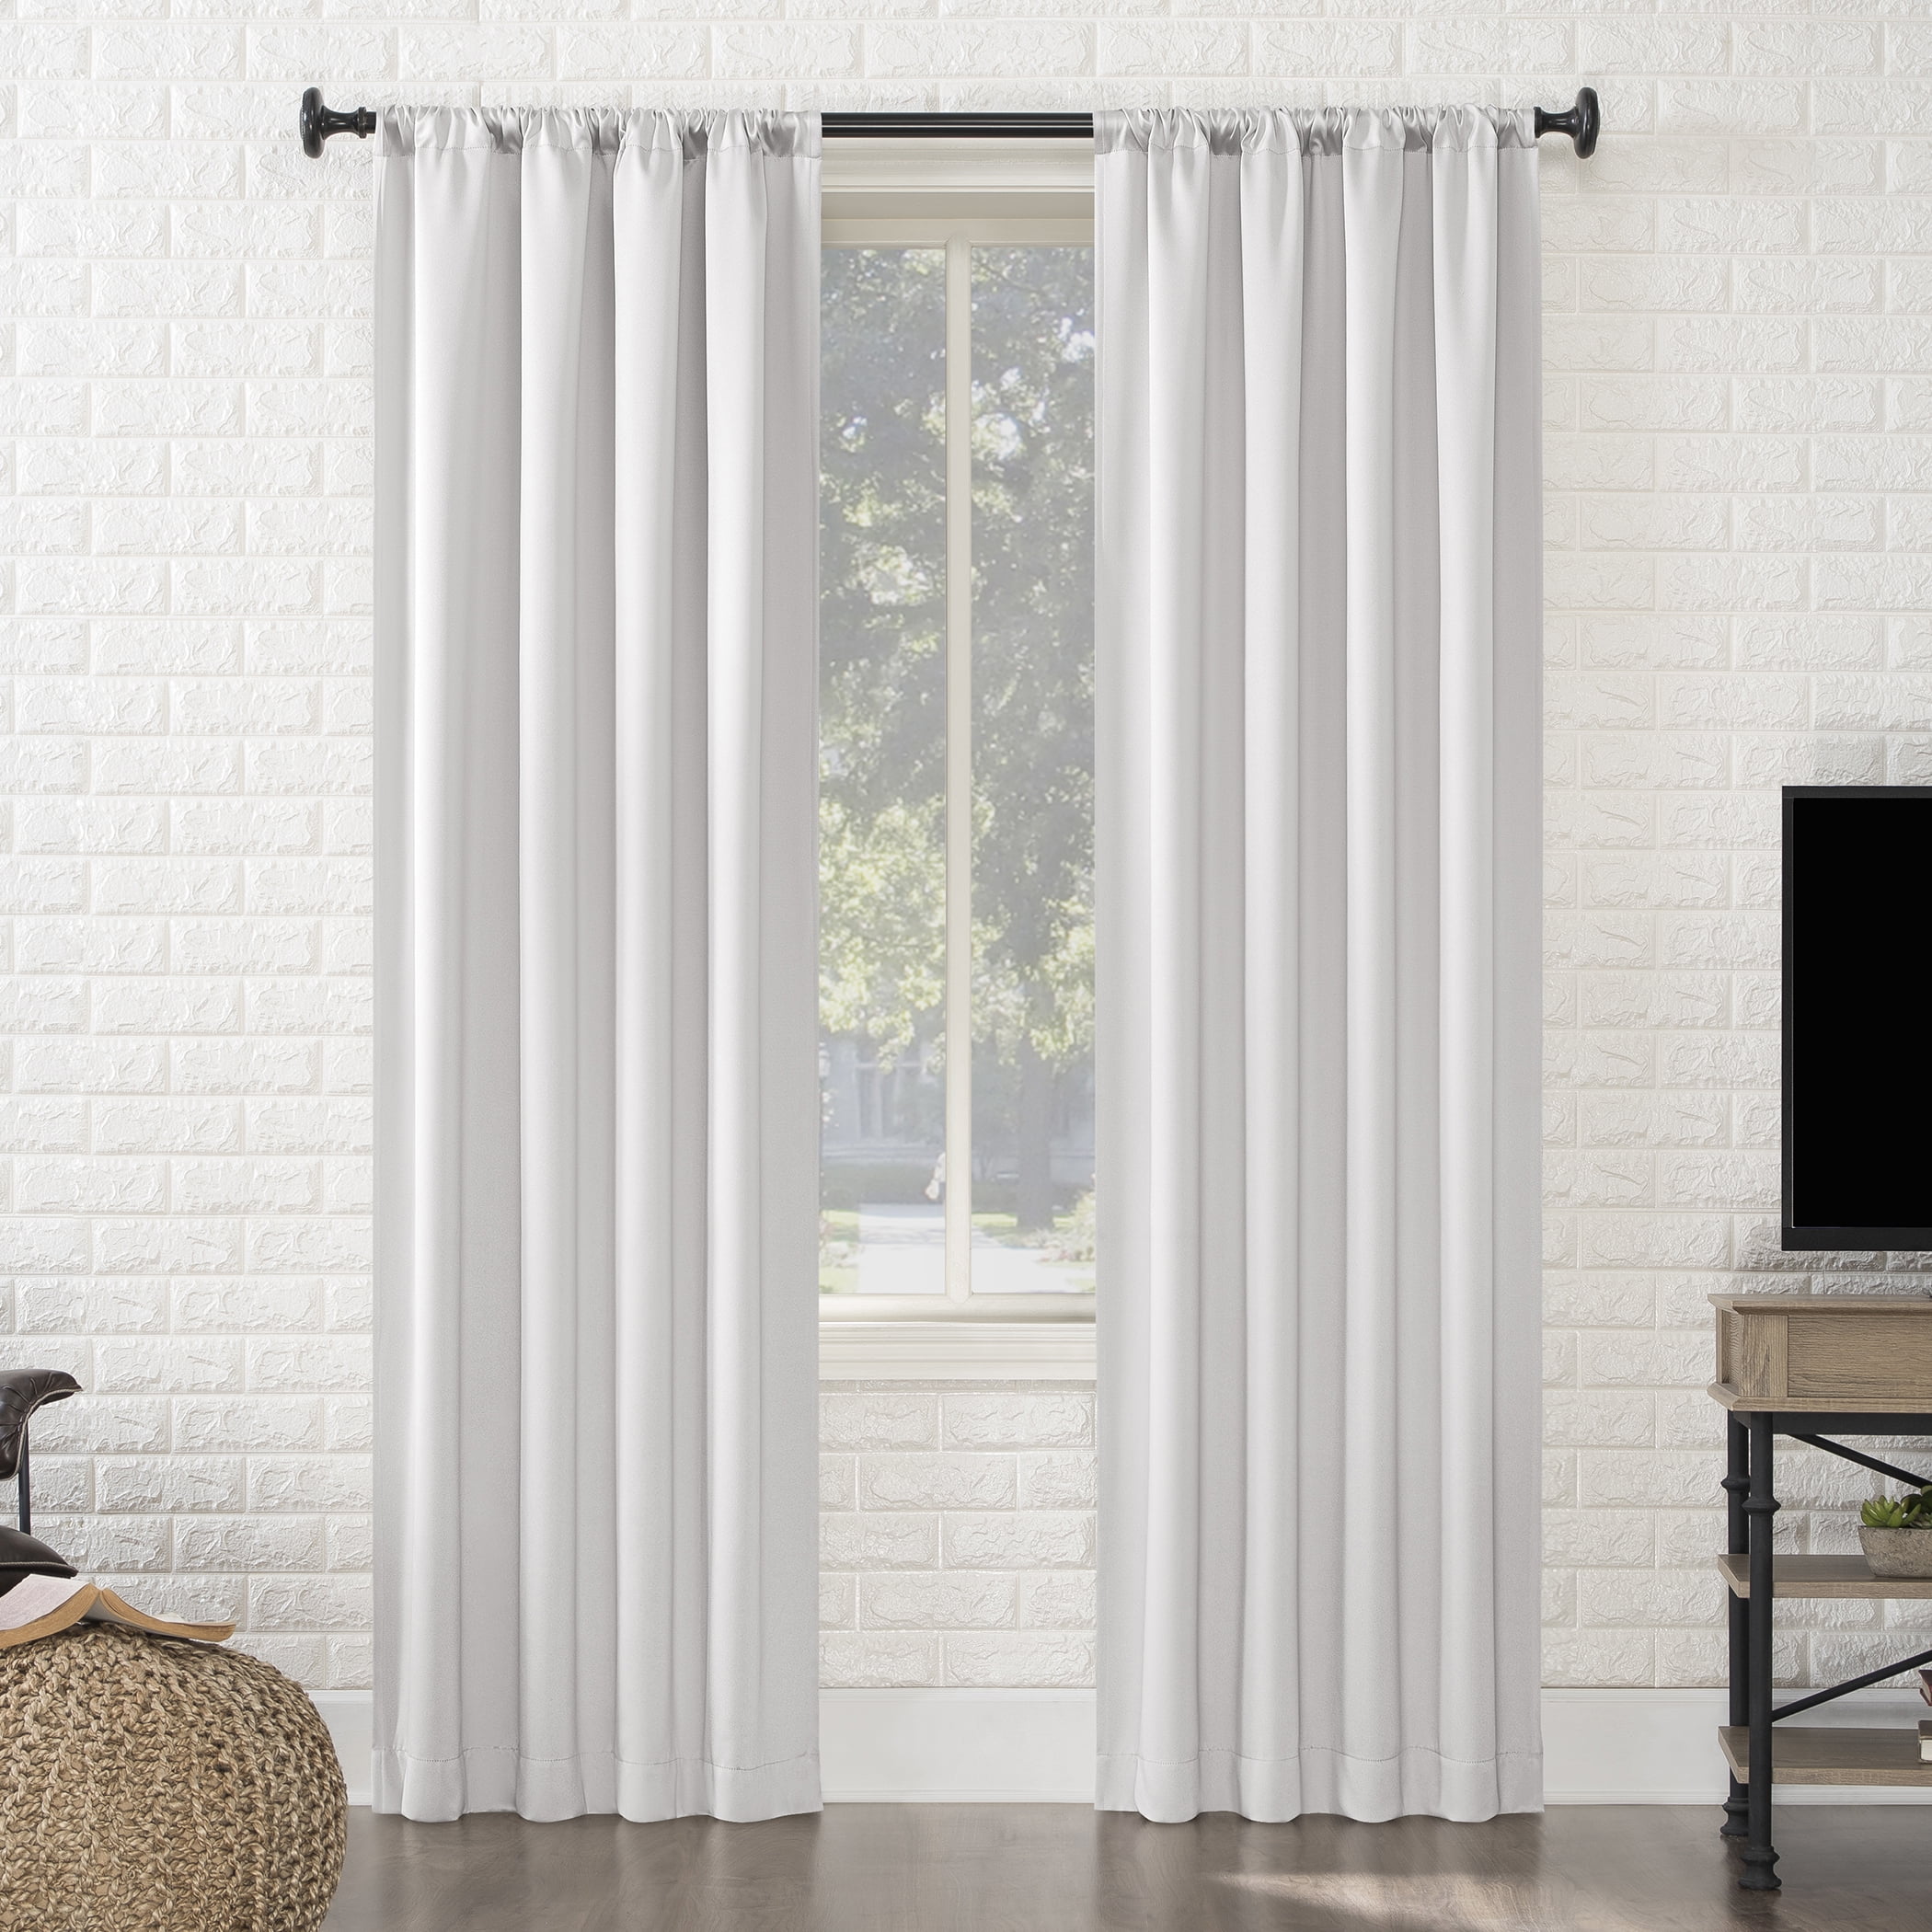 Isanti 37" x 63" Thermal Insulated Details about   ECLIPSE Room Darkening Curtains for Bedroom 